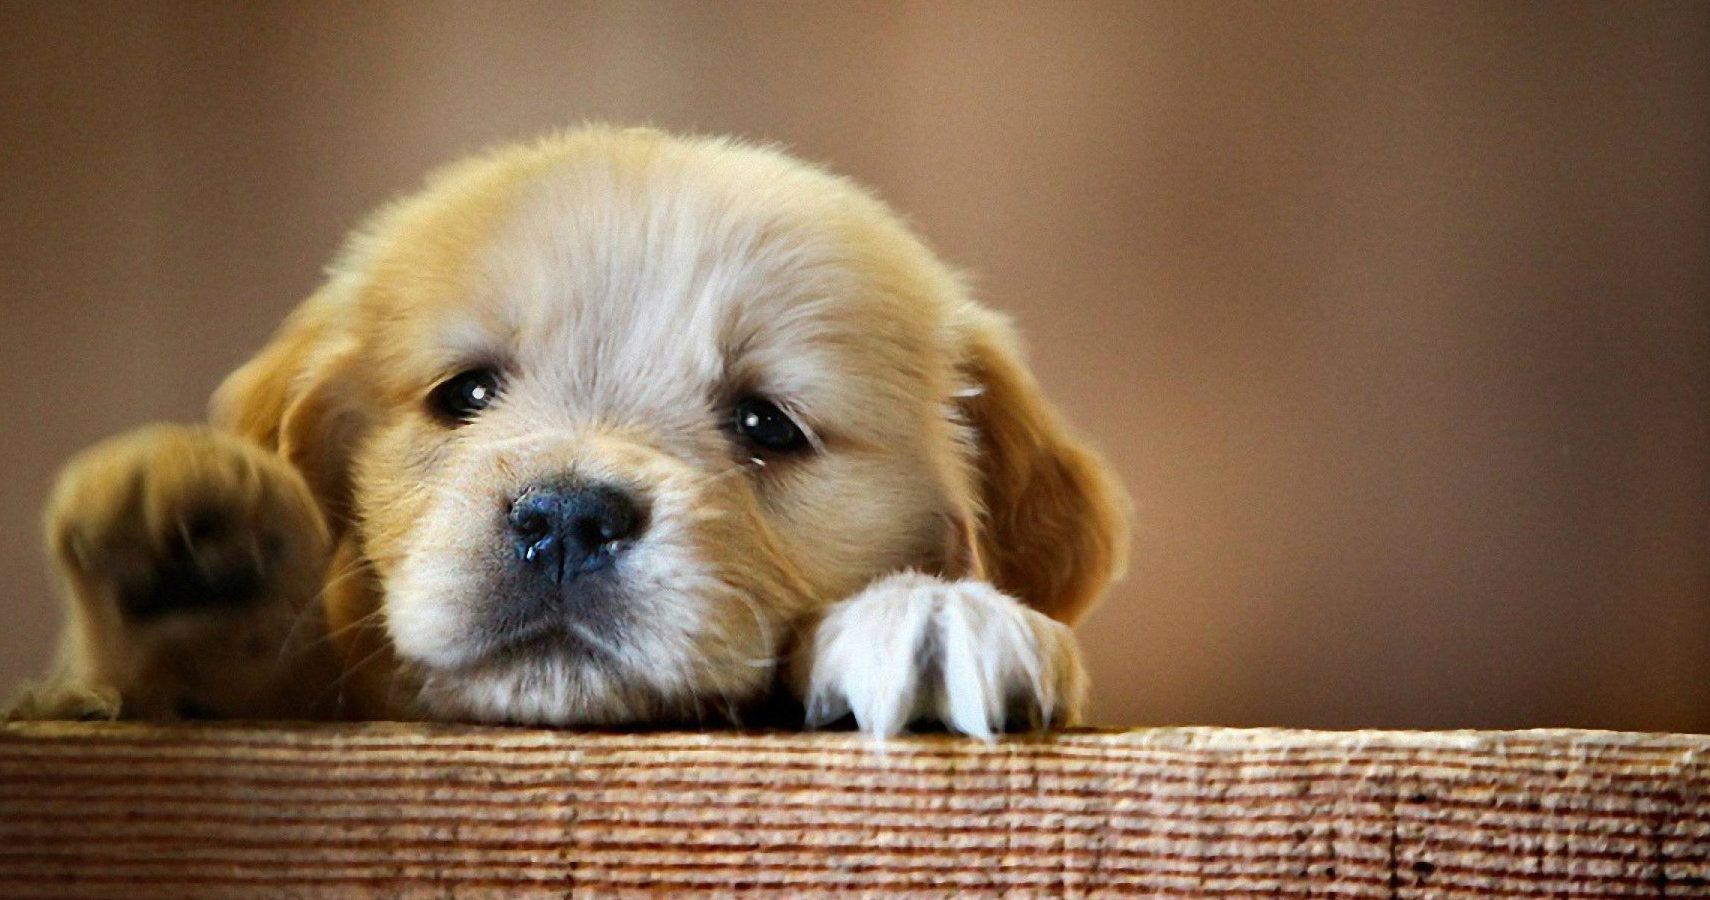 10 Adorable Names For Your Pet | TheThings